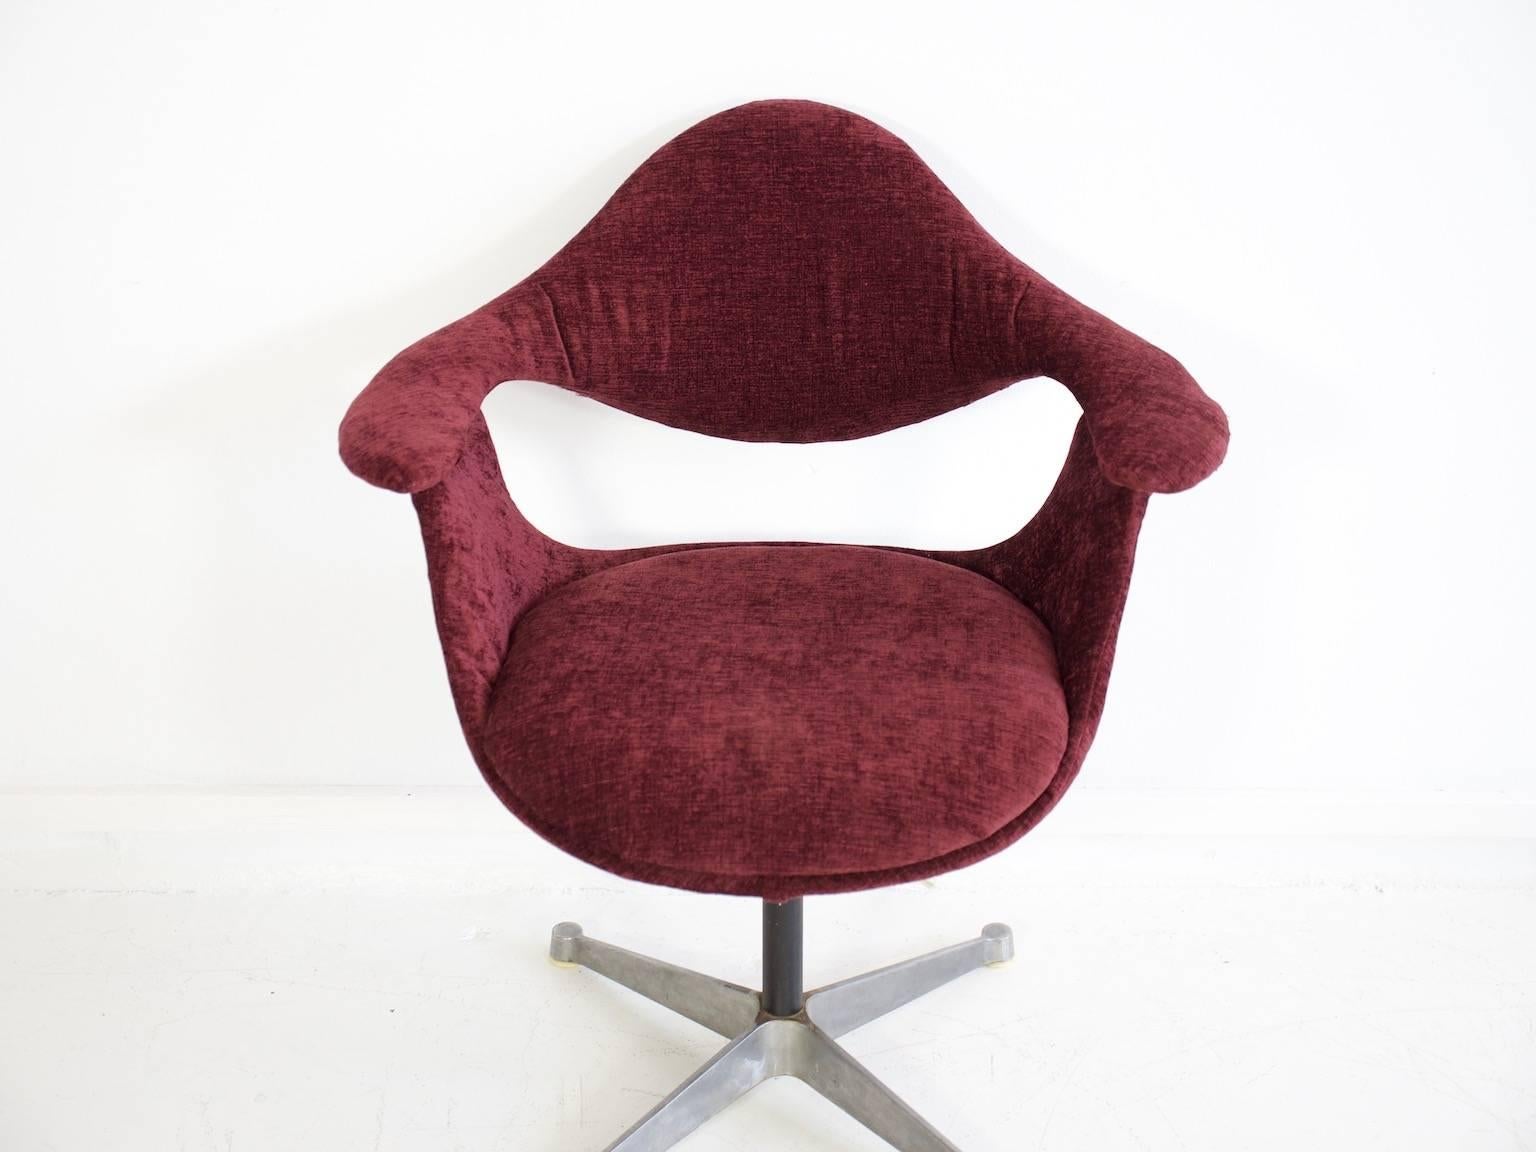 George Nelson DAF swivel chair produced by ICF De Padova, upholstered in burgundy red velvet fabric and with Industrial metal base. Very comfortable chair. Labeled on its base for both designer and maker. Very rare.